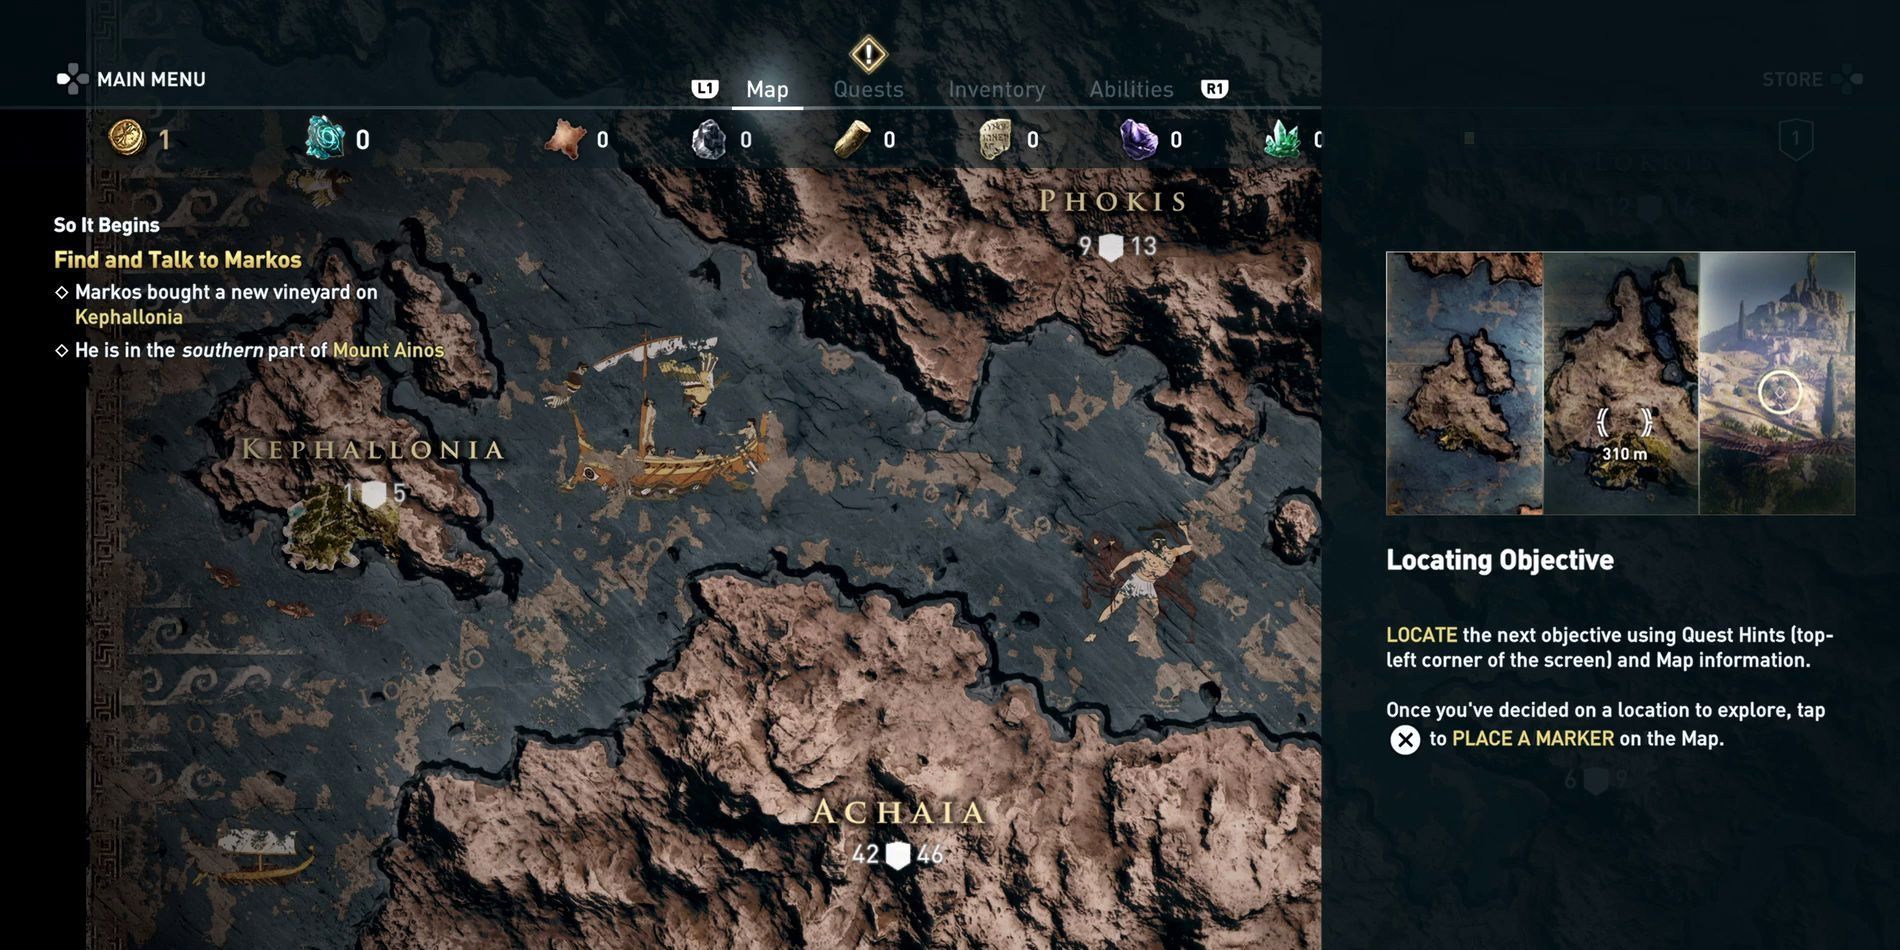 The Assassin's Creed Odyssey Map with an explainer for Exploration Mode